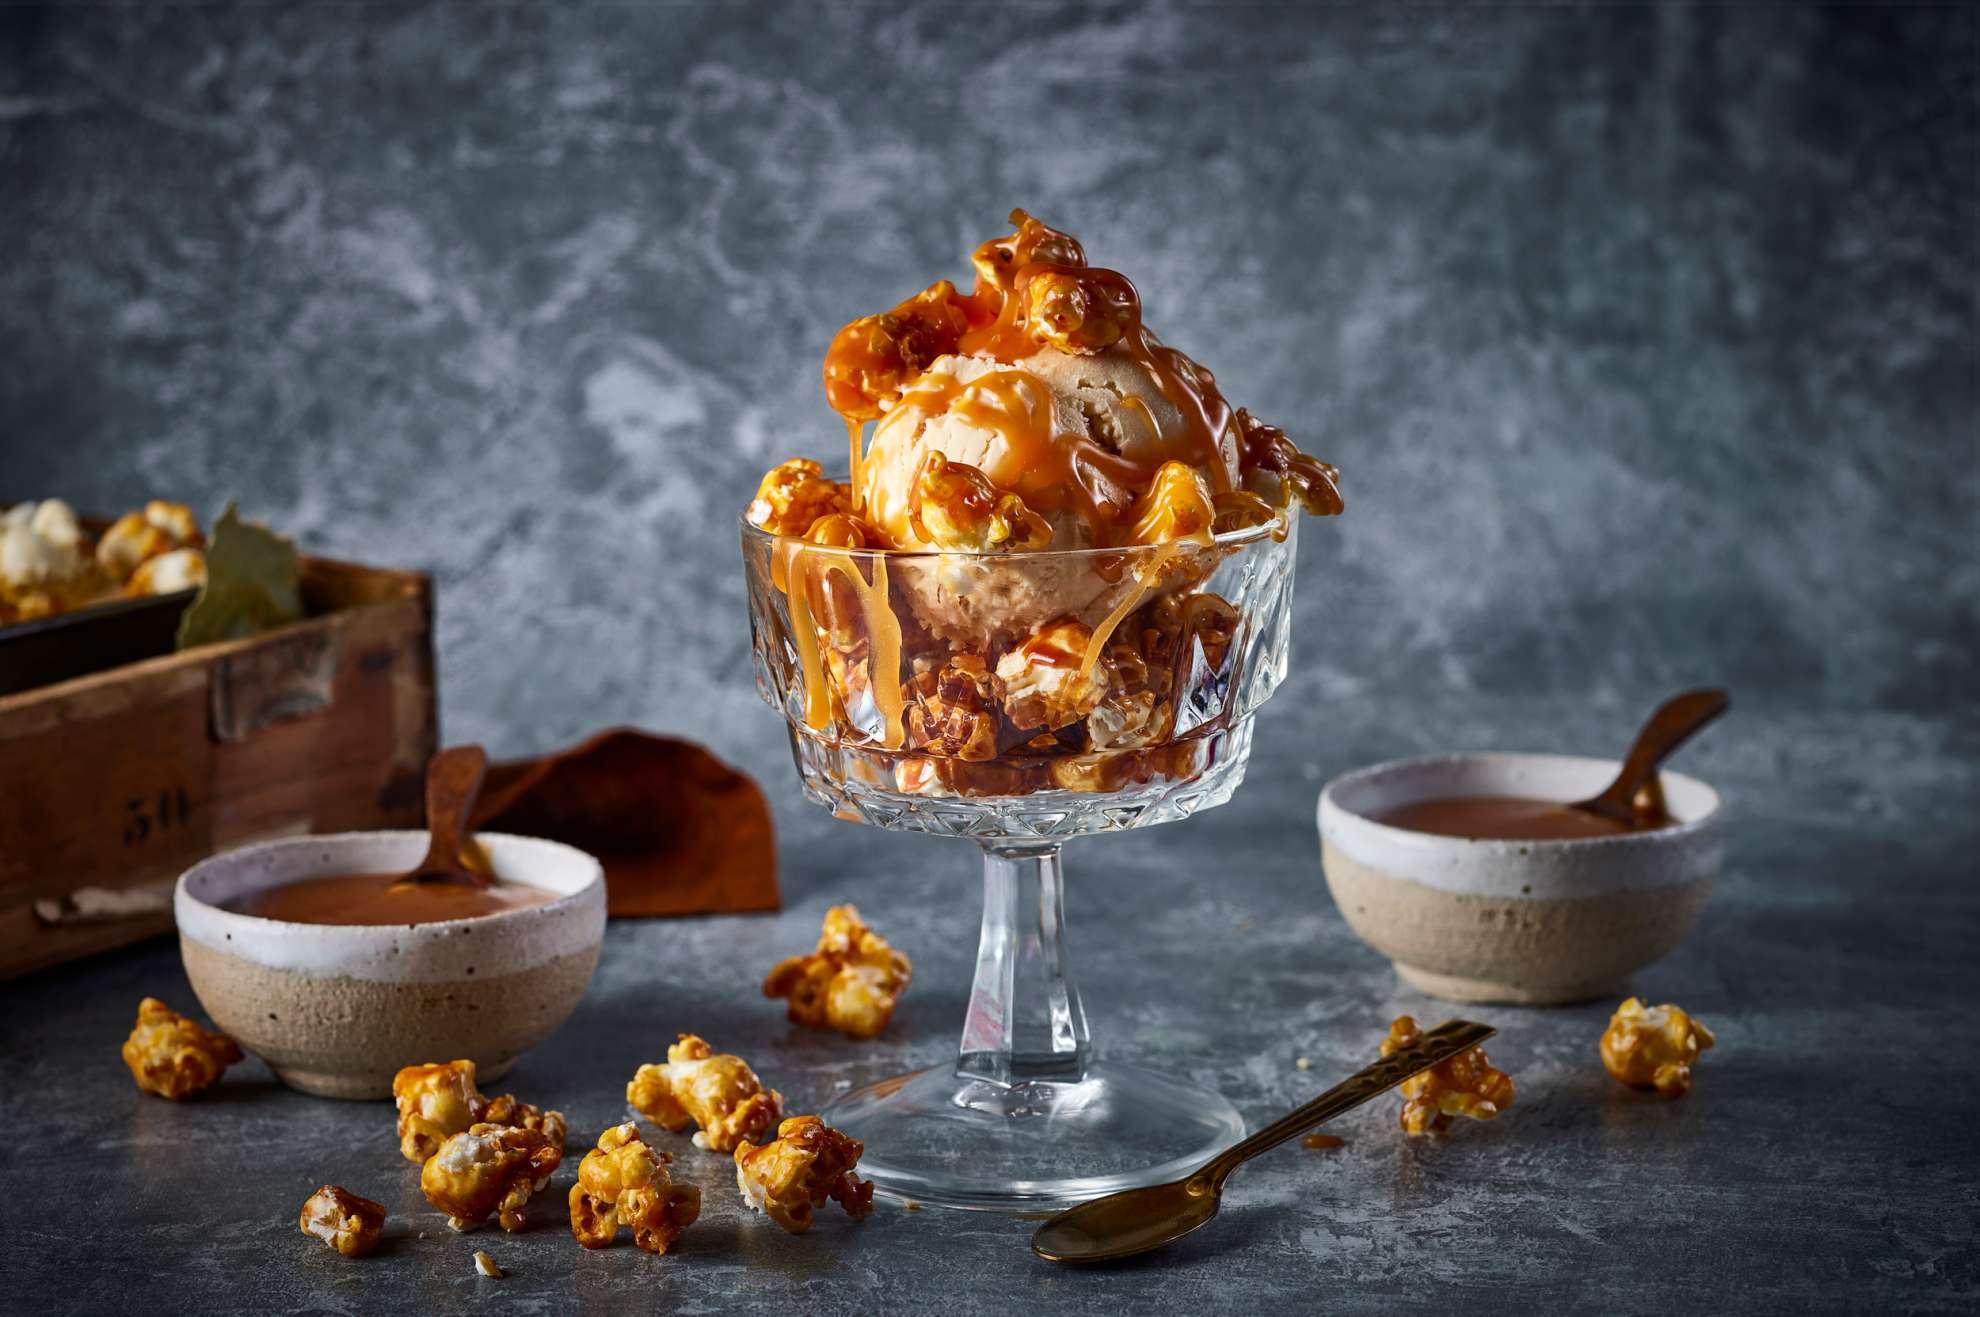 Caramelized popcorn topping for ice cream